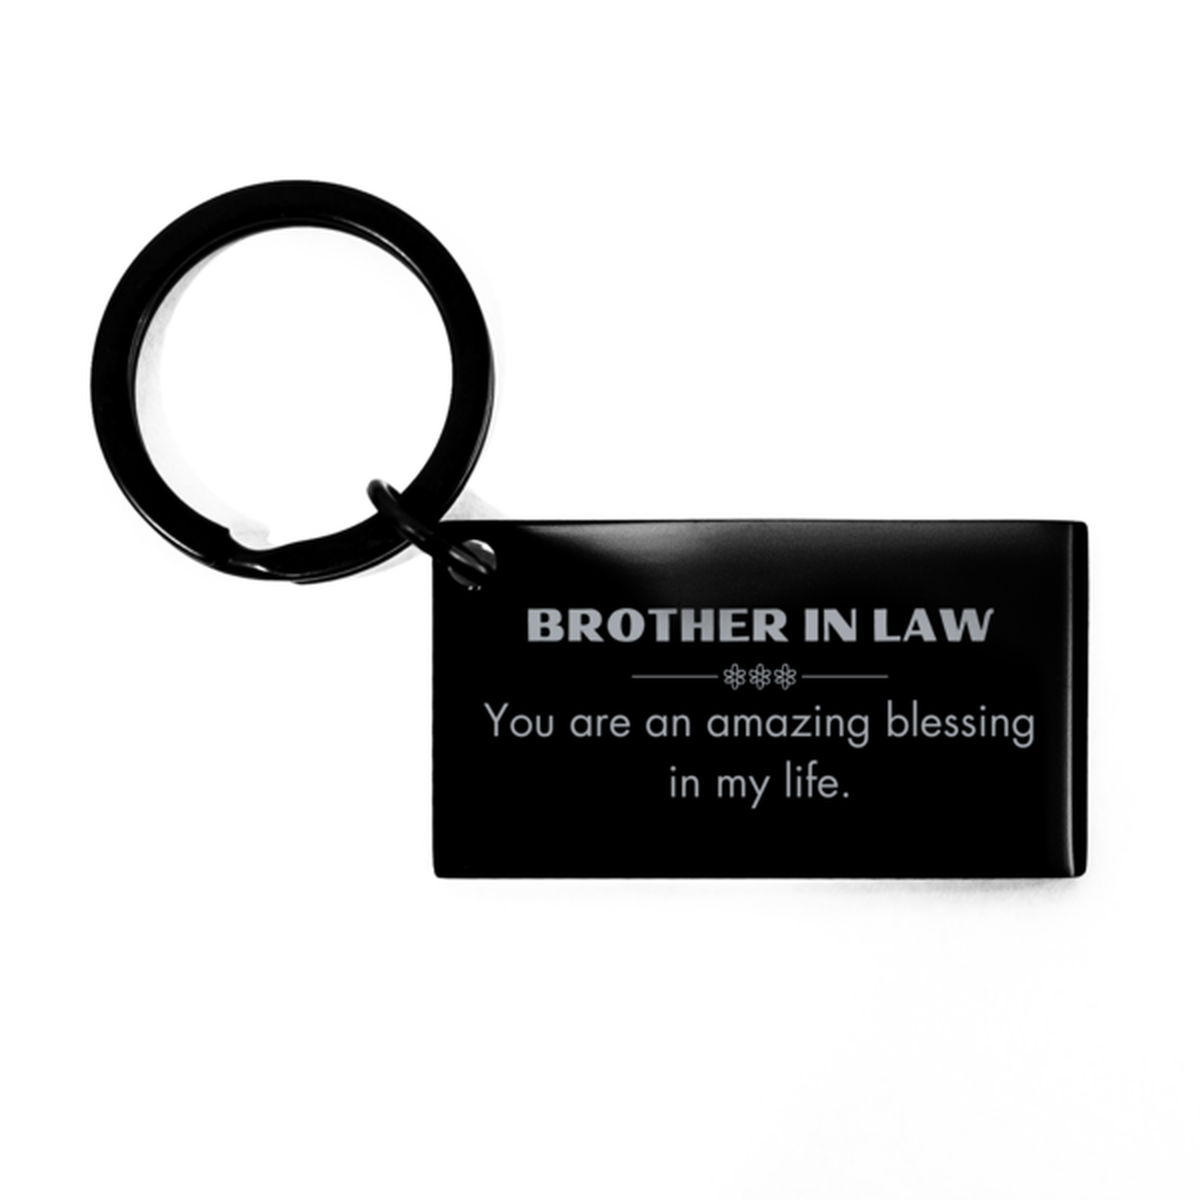 Brother In Law Keychain, You are an amazing blessing in my life, Thank You Gifts For Brother In Law, Inspirational Birthday Christmas Unique Gifts For Brother In Law